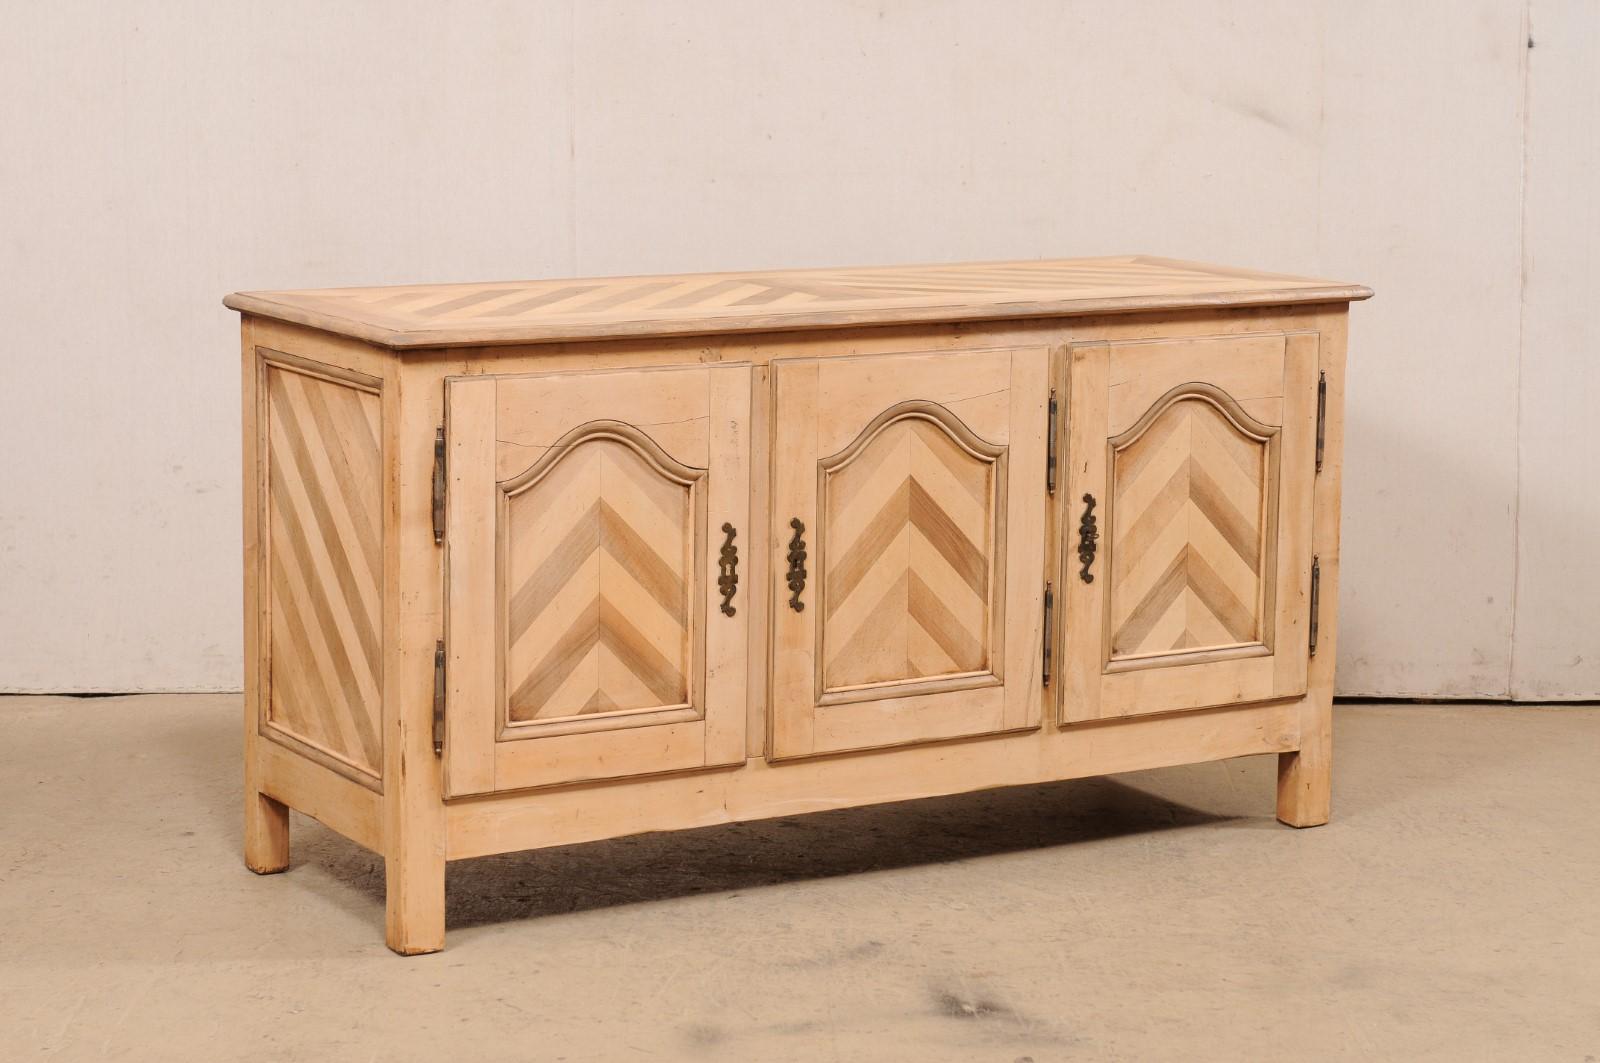 A French wooden buffet cabinet from the mid 20th century. This vintage French sideboard, approximately 5.75 feet in length, is uniquely embellished with an inlaid wood pattern of angular lines that create a wonderful chevron pattern on the door